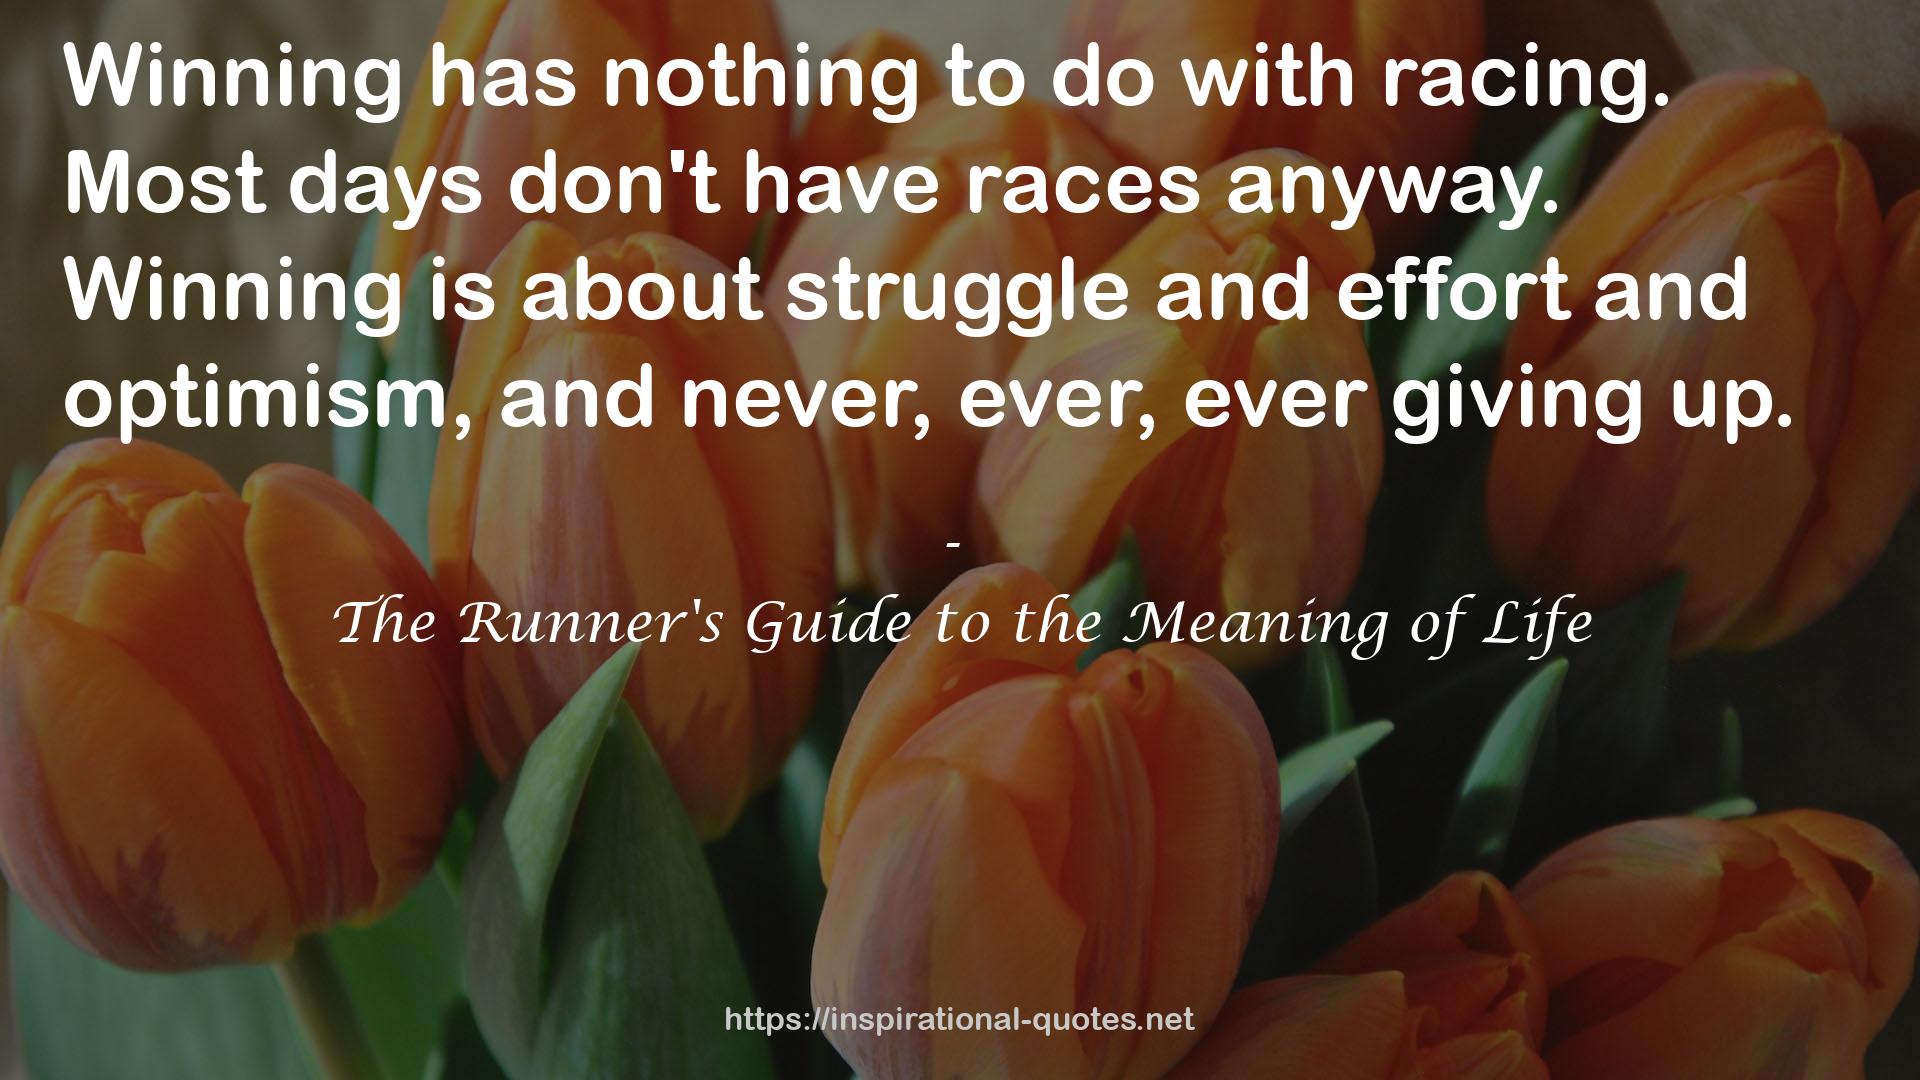 The Runner's Guide to the Meaning of Life QUOTES